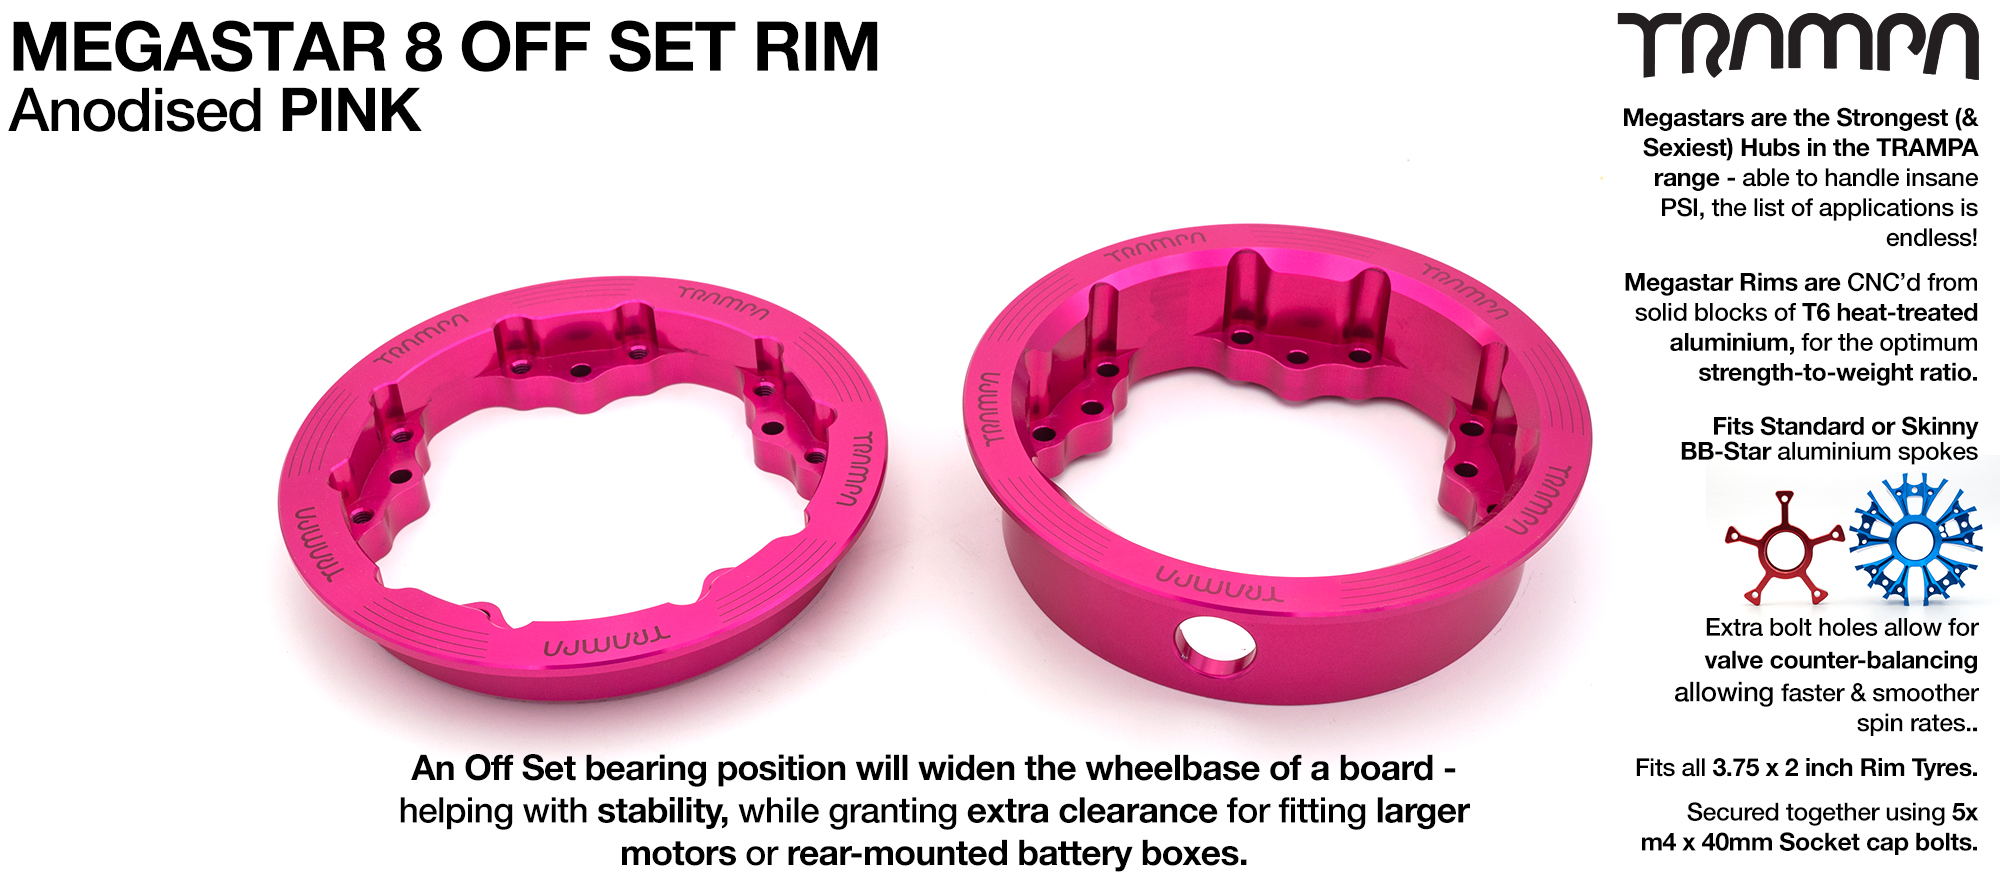 MEGASTAR 8 OS Rims Measure 3.75 x 2 Inch. The bearings are positioned OFF-SET widening the wheel base & accept all 3.75 Rim Tyres - PINK